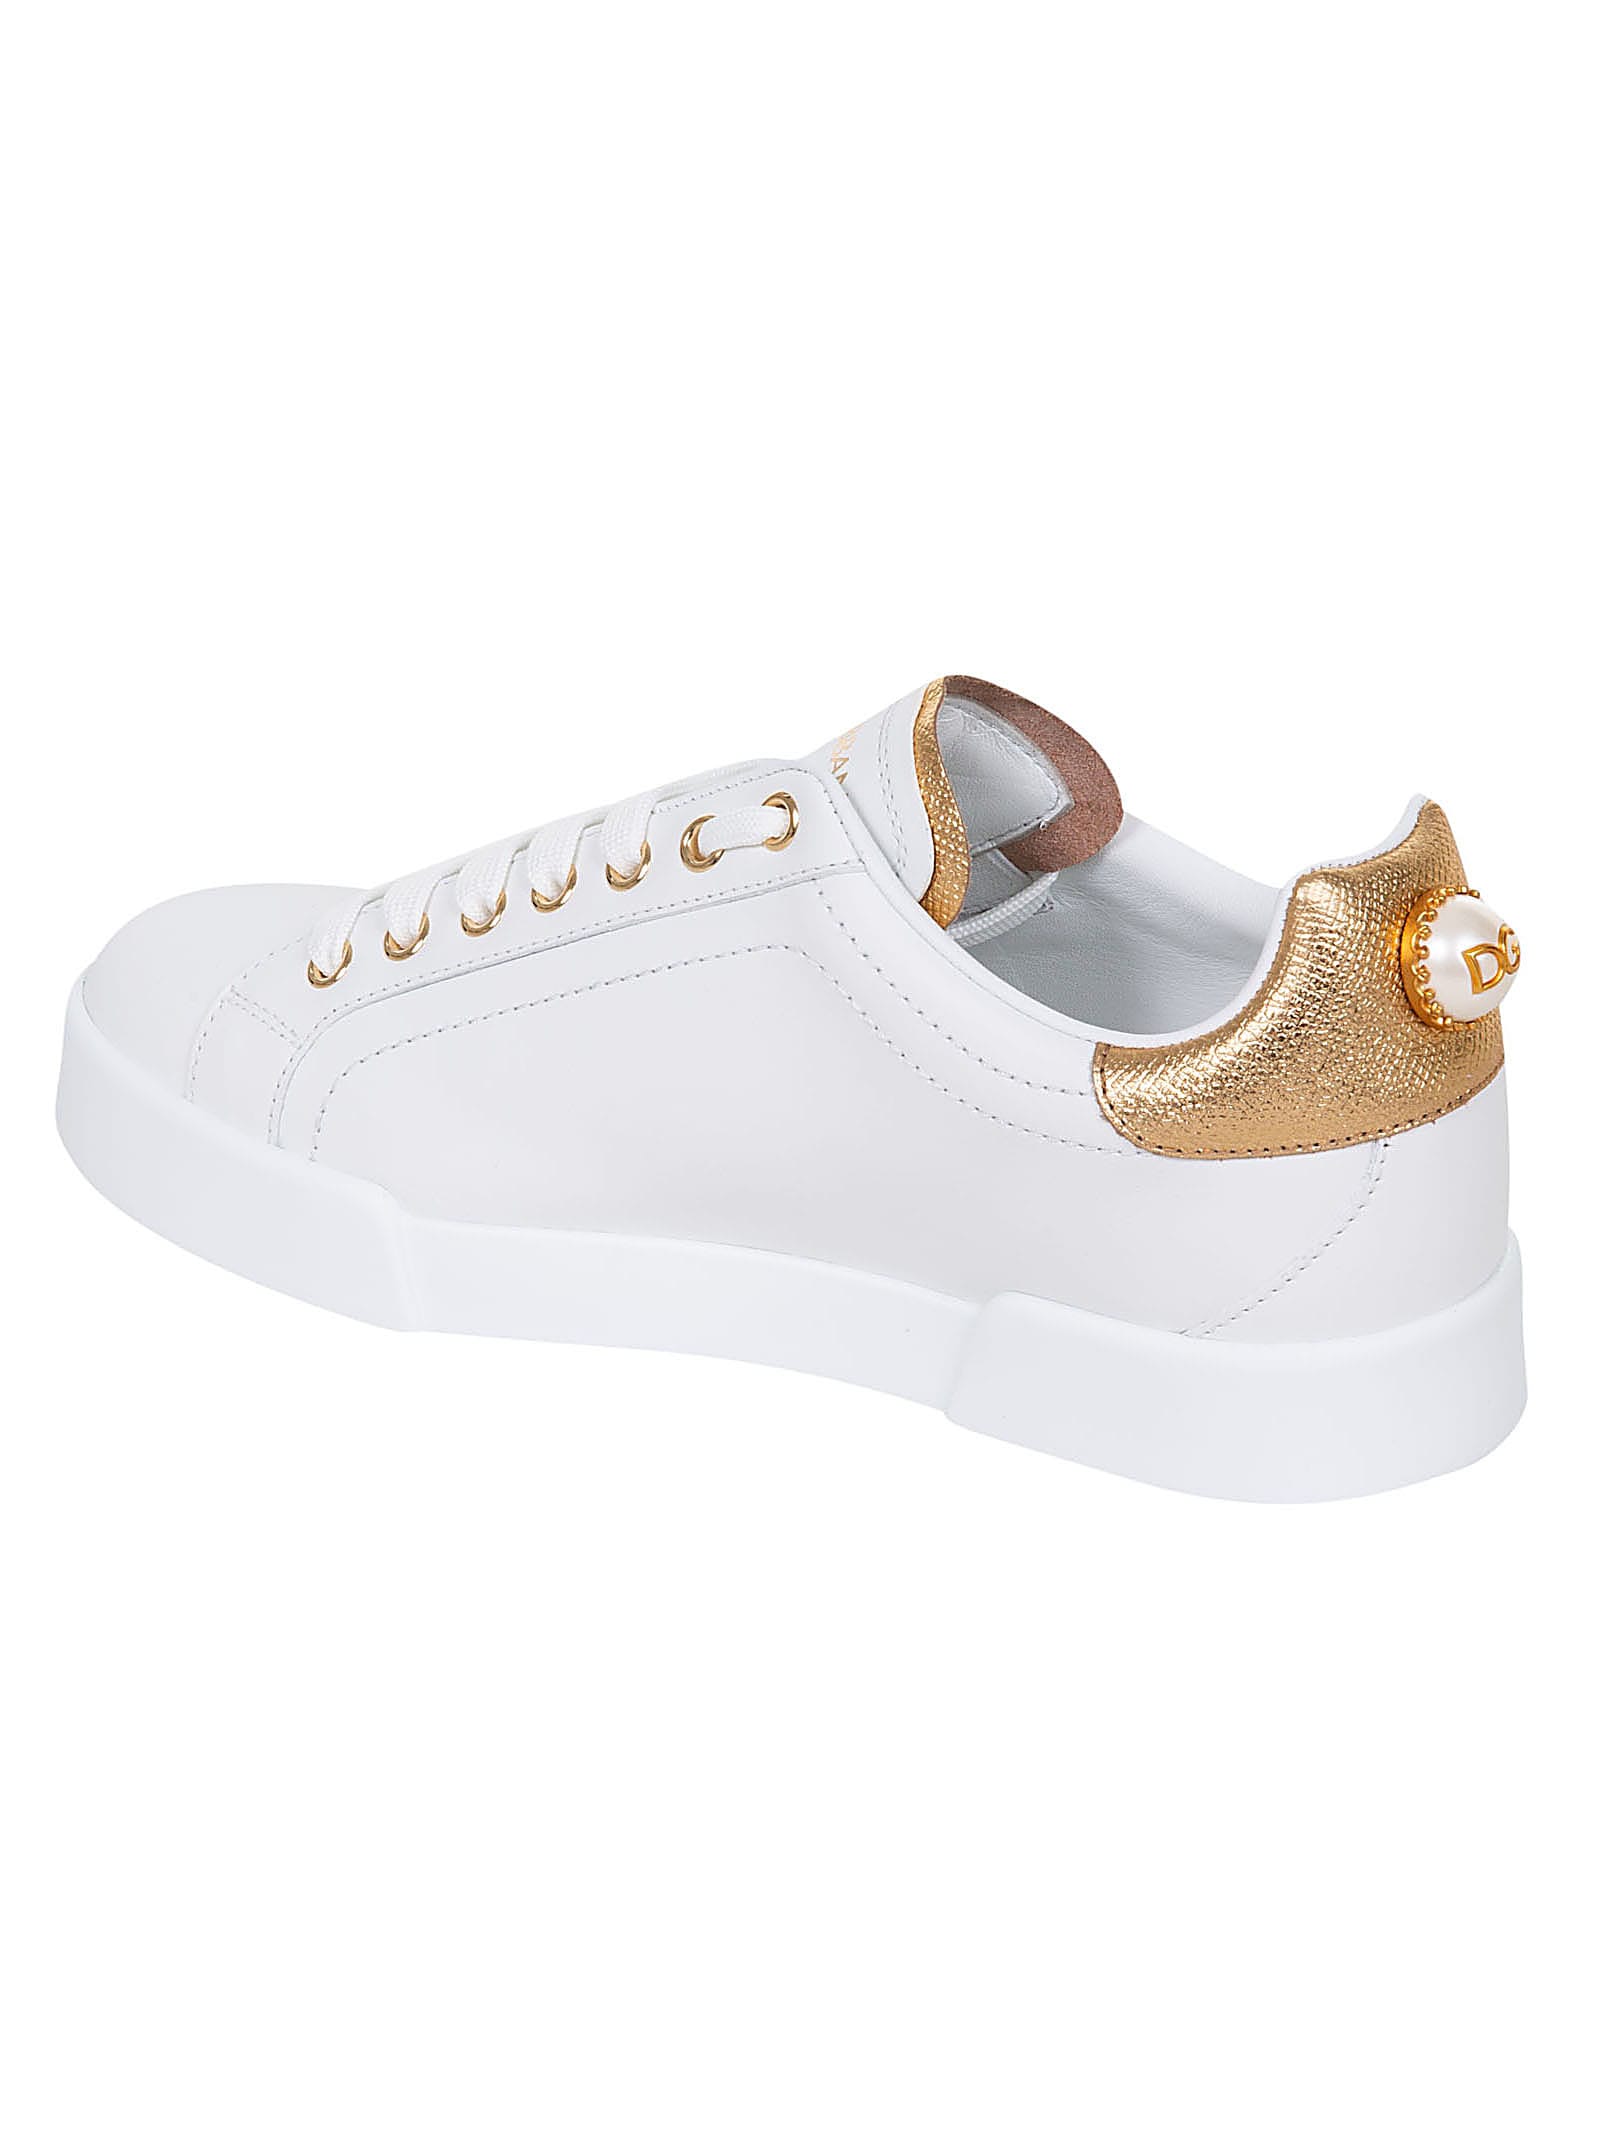 Dolce & Gabbana White Pearl Embellished Leather Sneakers | italist, ALWAYS  LIKE A SALE